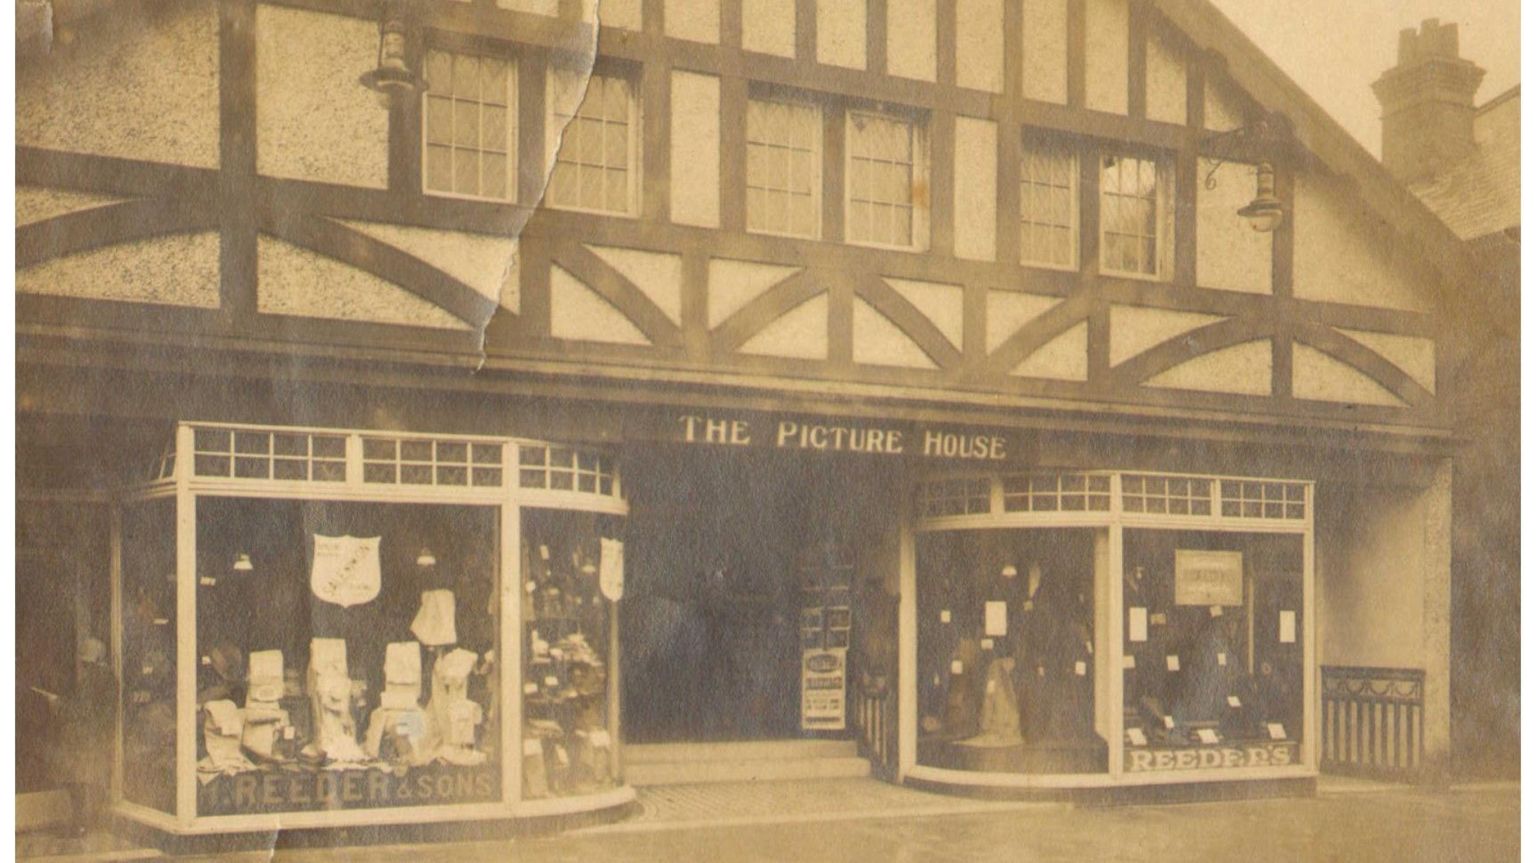 Leiston Film Theatre in the early 20th century